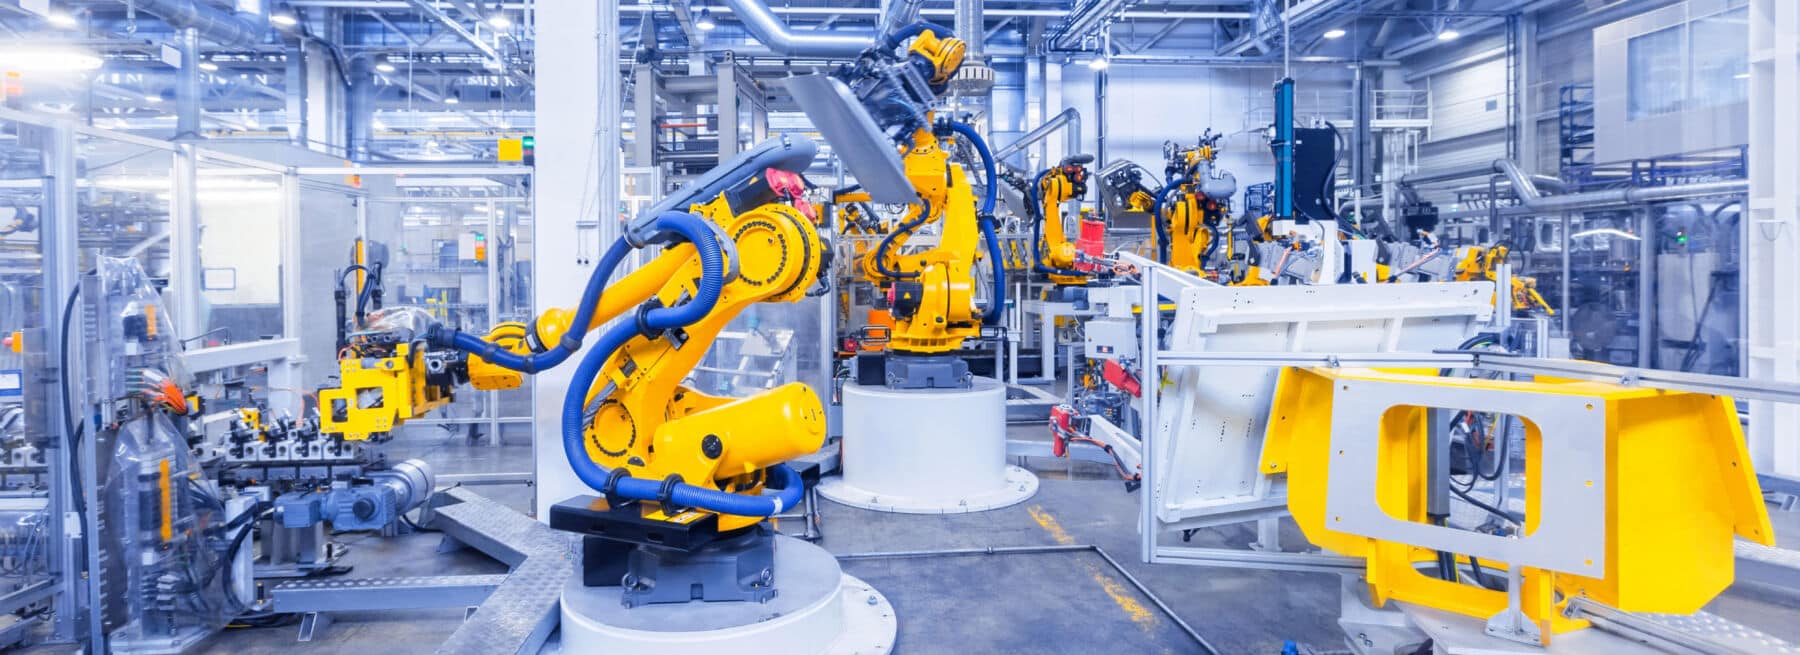 The future of manufacturing technologies